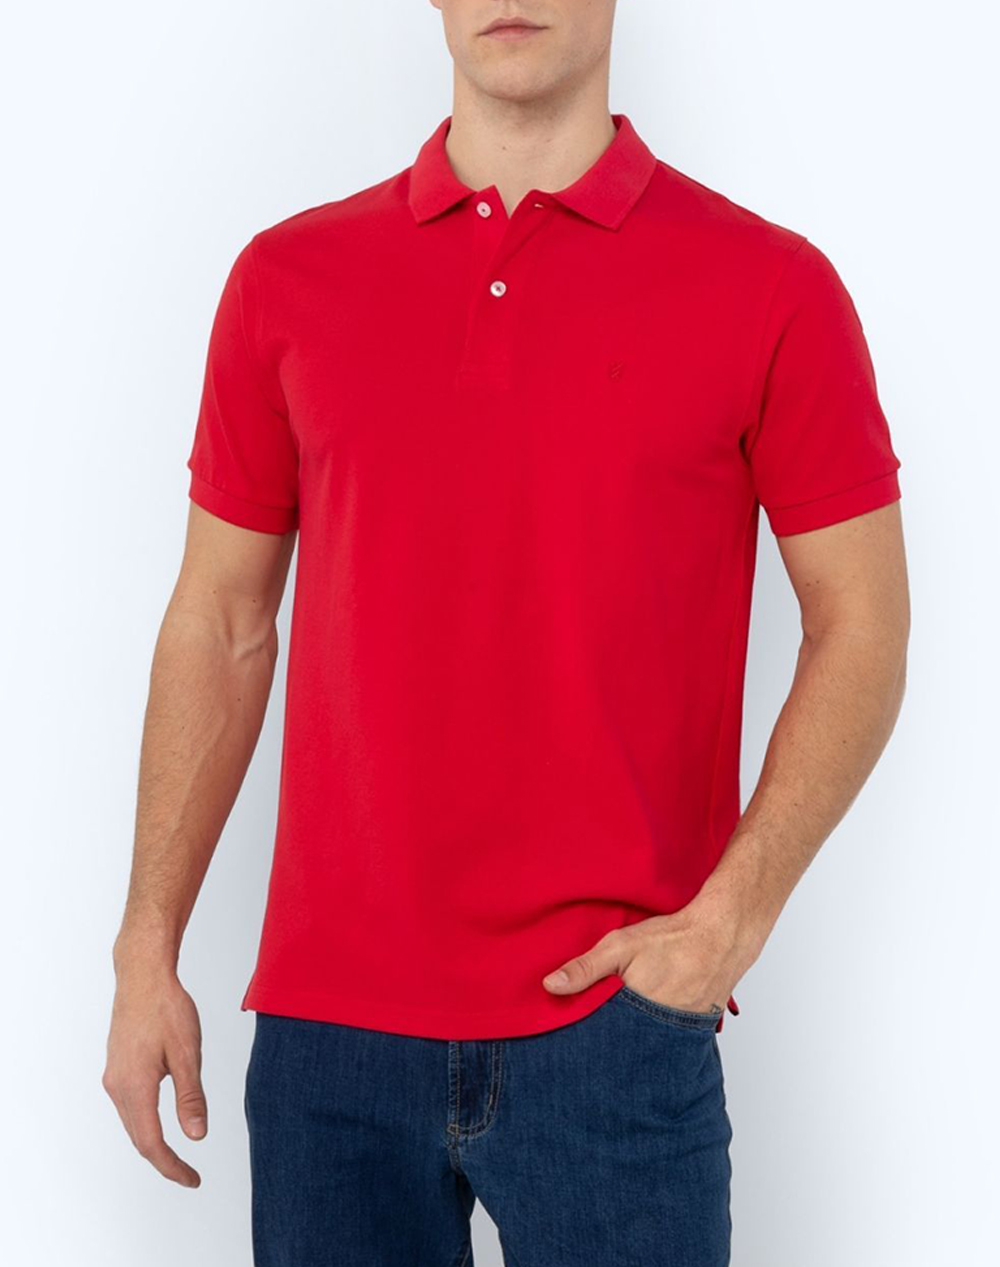 THE BOSTONIANS ΜΠΛΟΥΖΑ POLO PIQUE REGULAR FIT 3PS0001-LIGHT Red 3820ABOST3410092_XR30399